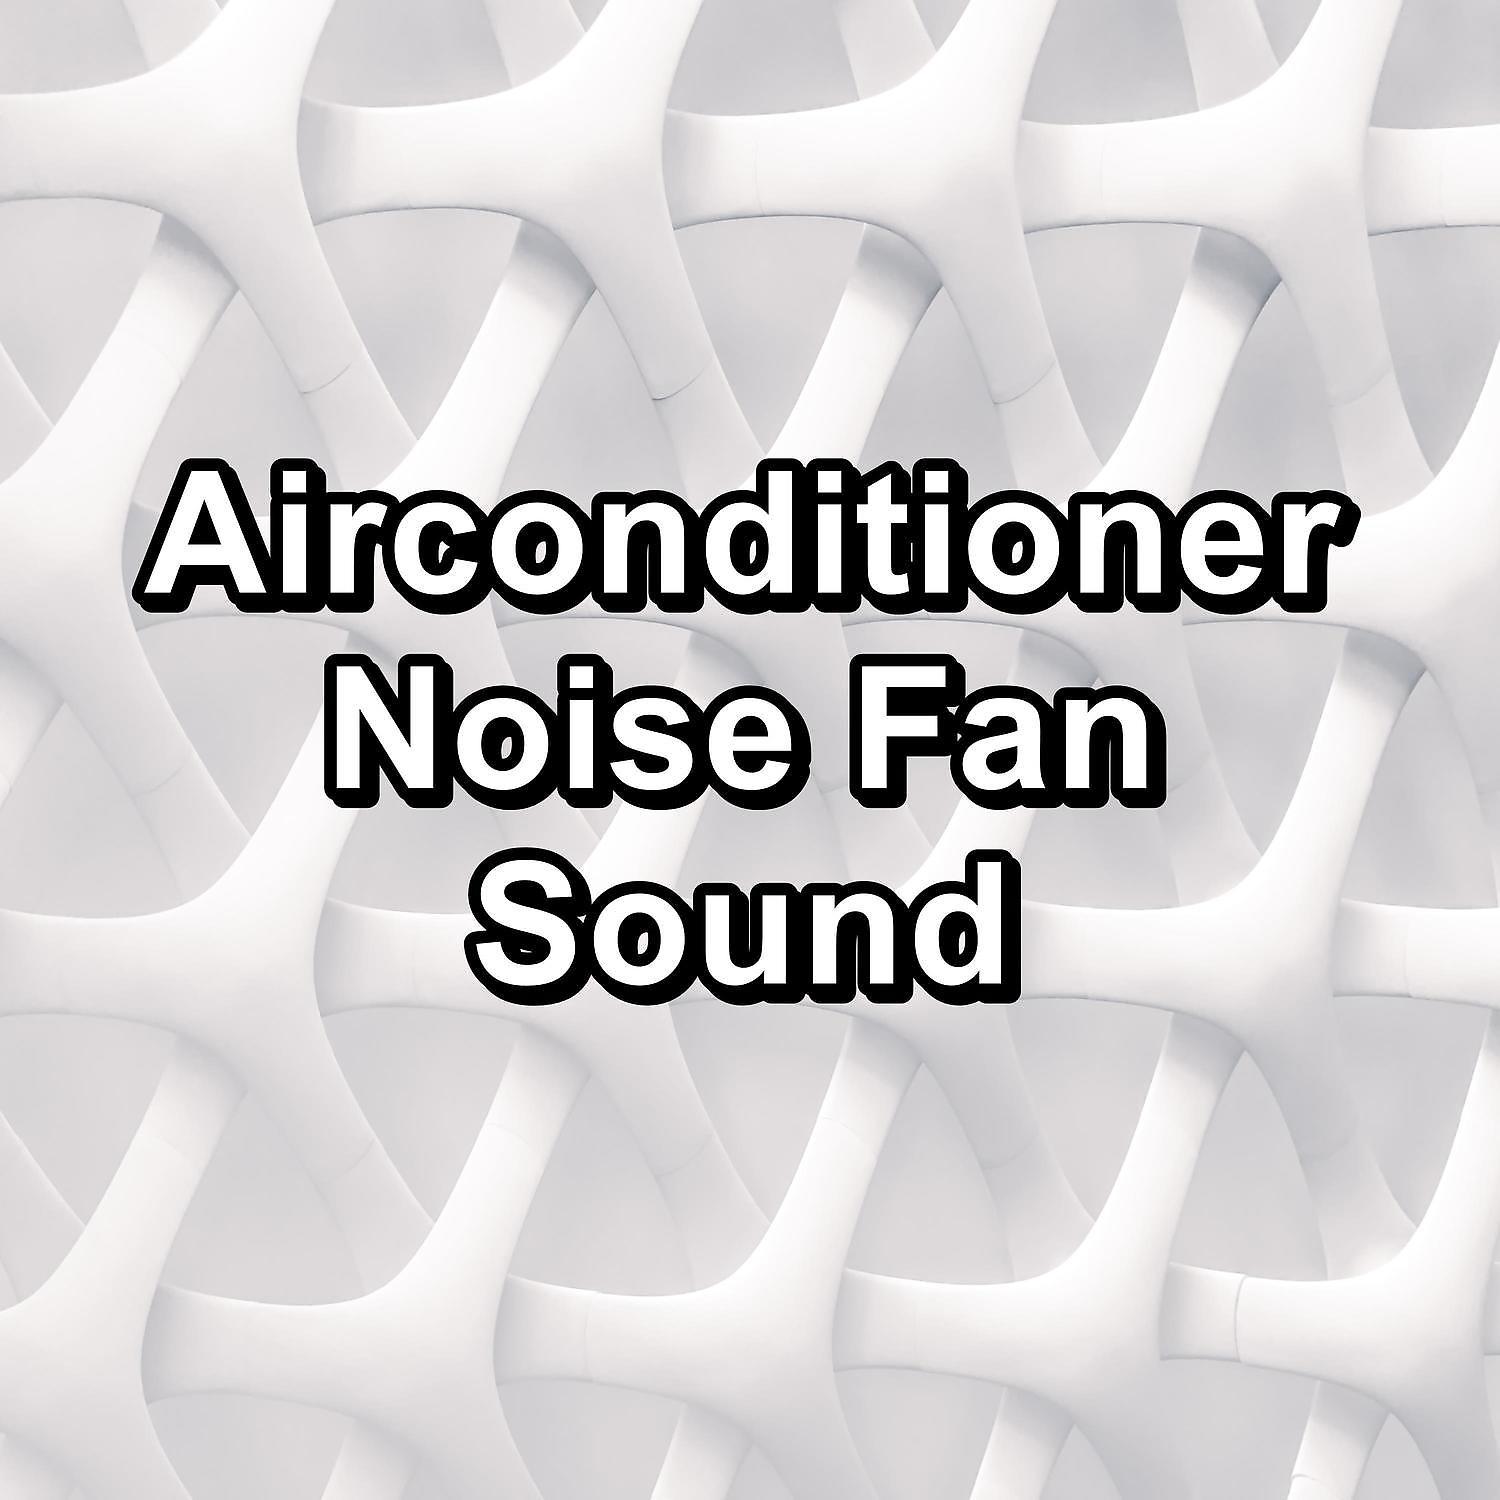 Pink Noise Sound, Brown Noise Sound, White Noise Sound - Medium Fan Sounds Anti Stress To Help your Babies Sleep